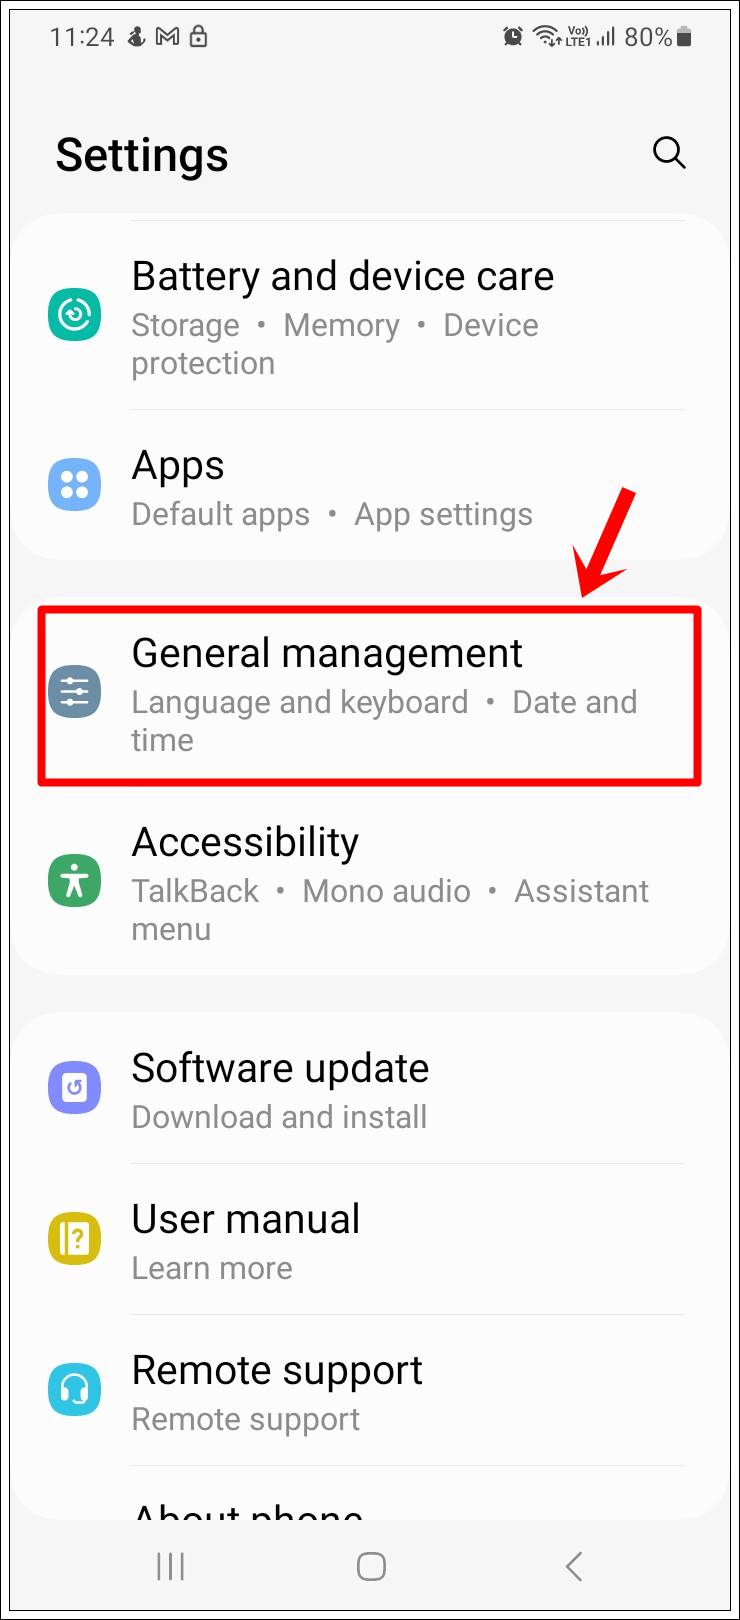 This image shows a screenshot of a Samsung Galaxy phone's 'Settings' page with the ' General Management' option highlighted.